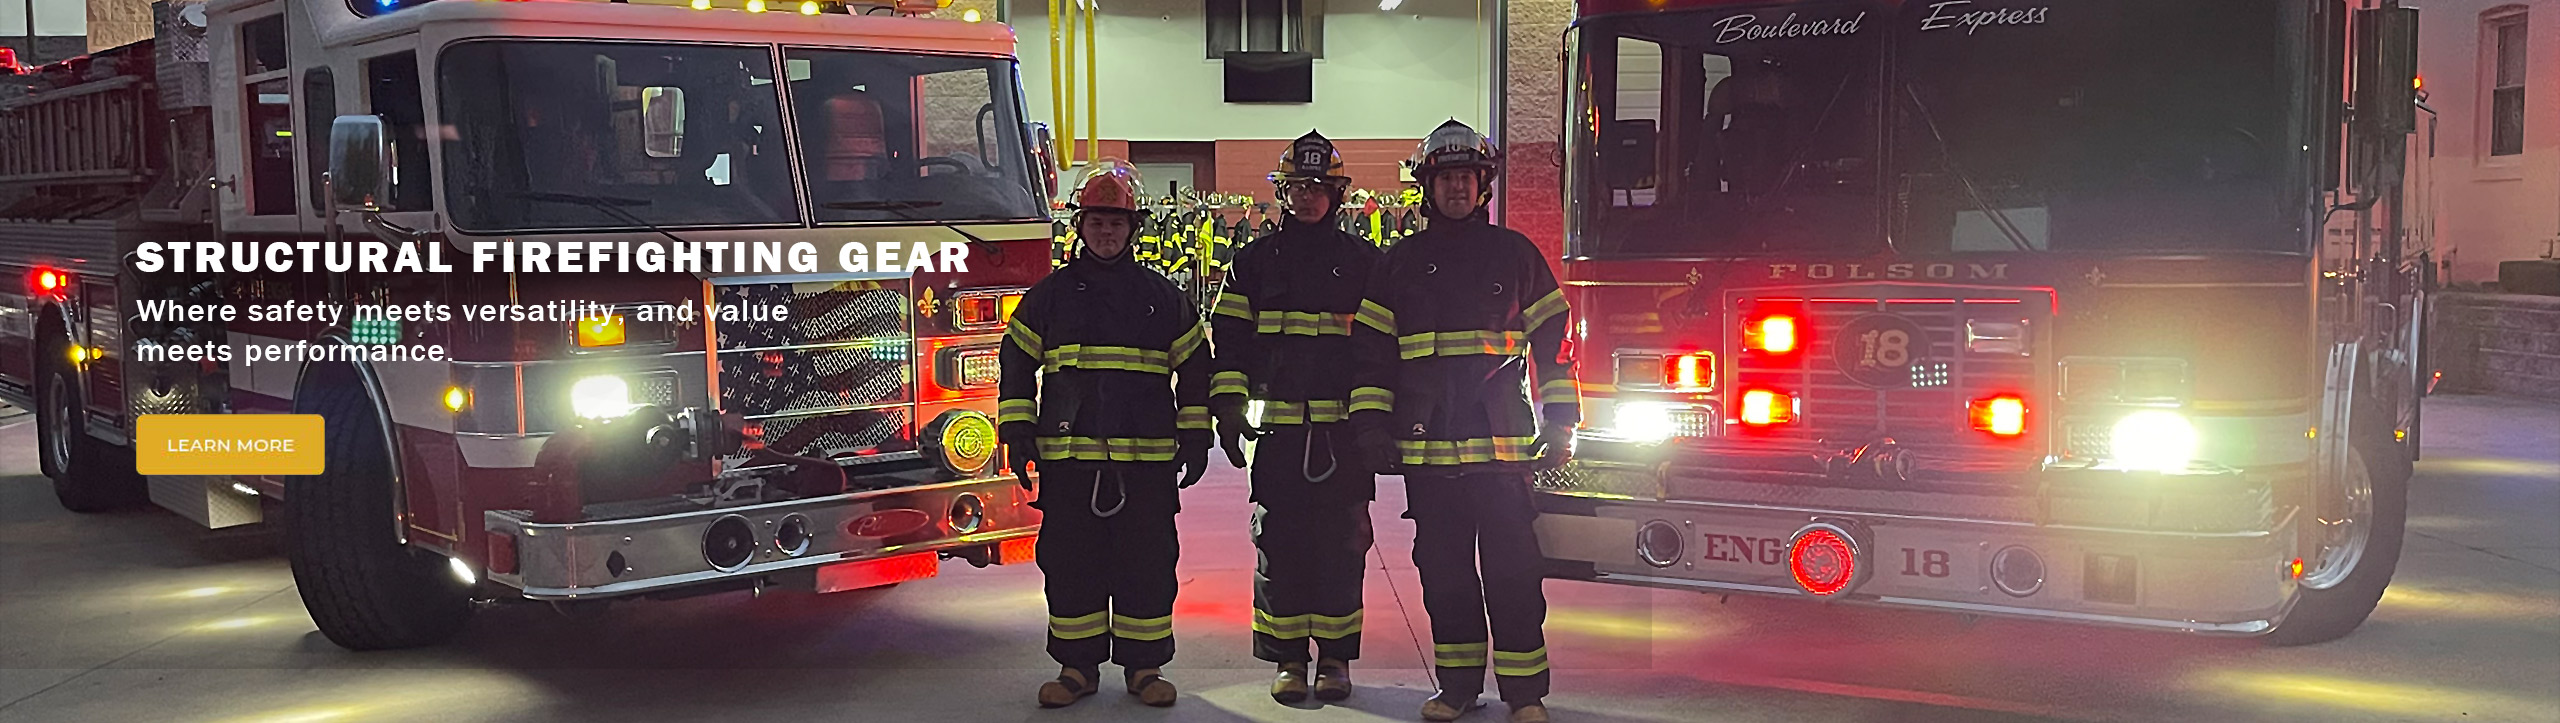 Structural Firefighting Gear - Ships in 10 Weeks - Learn More